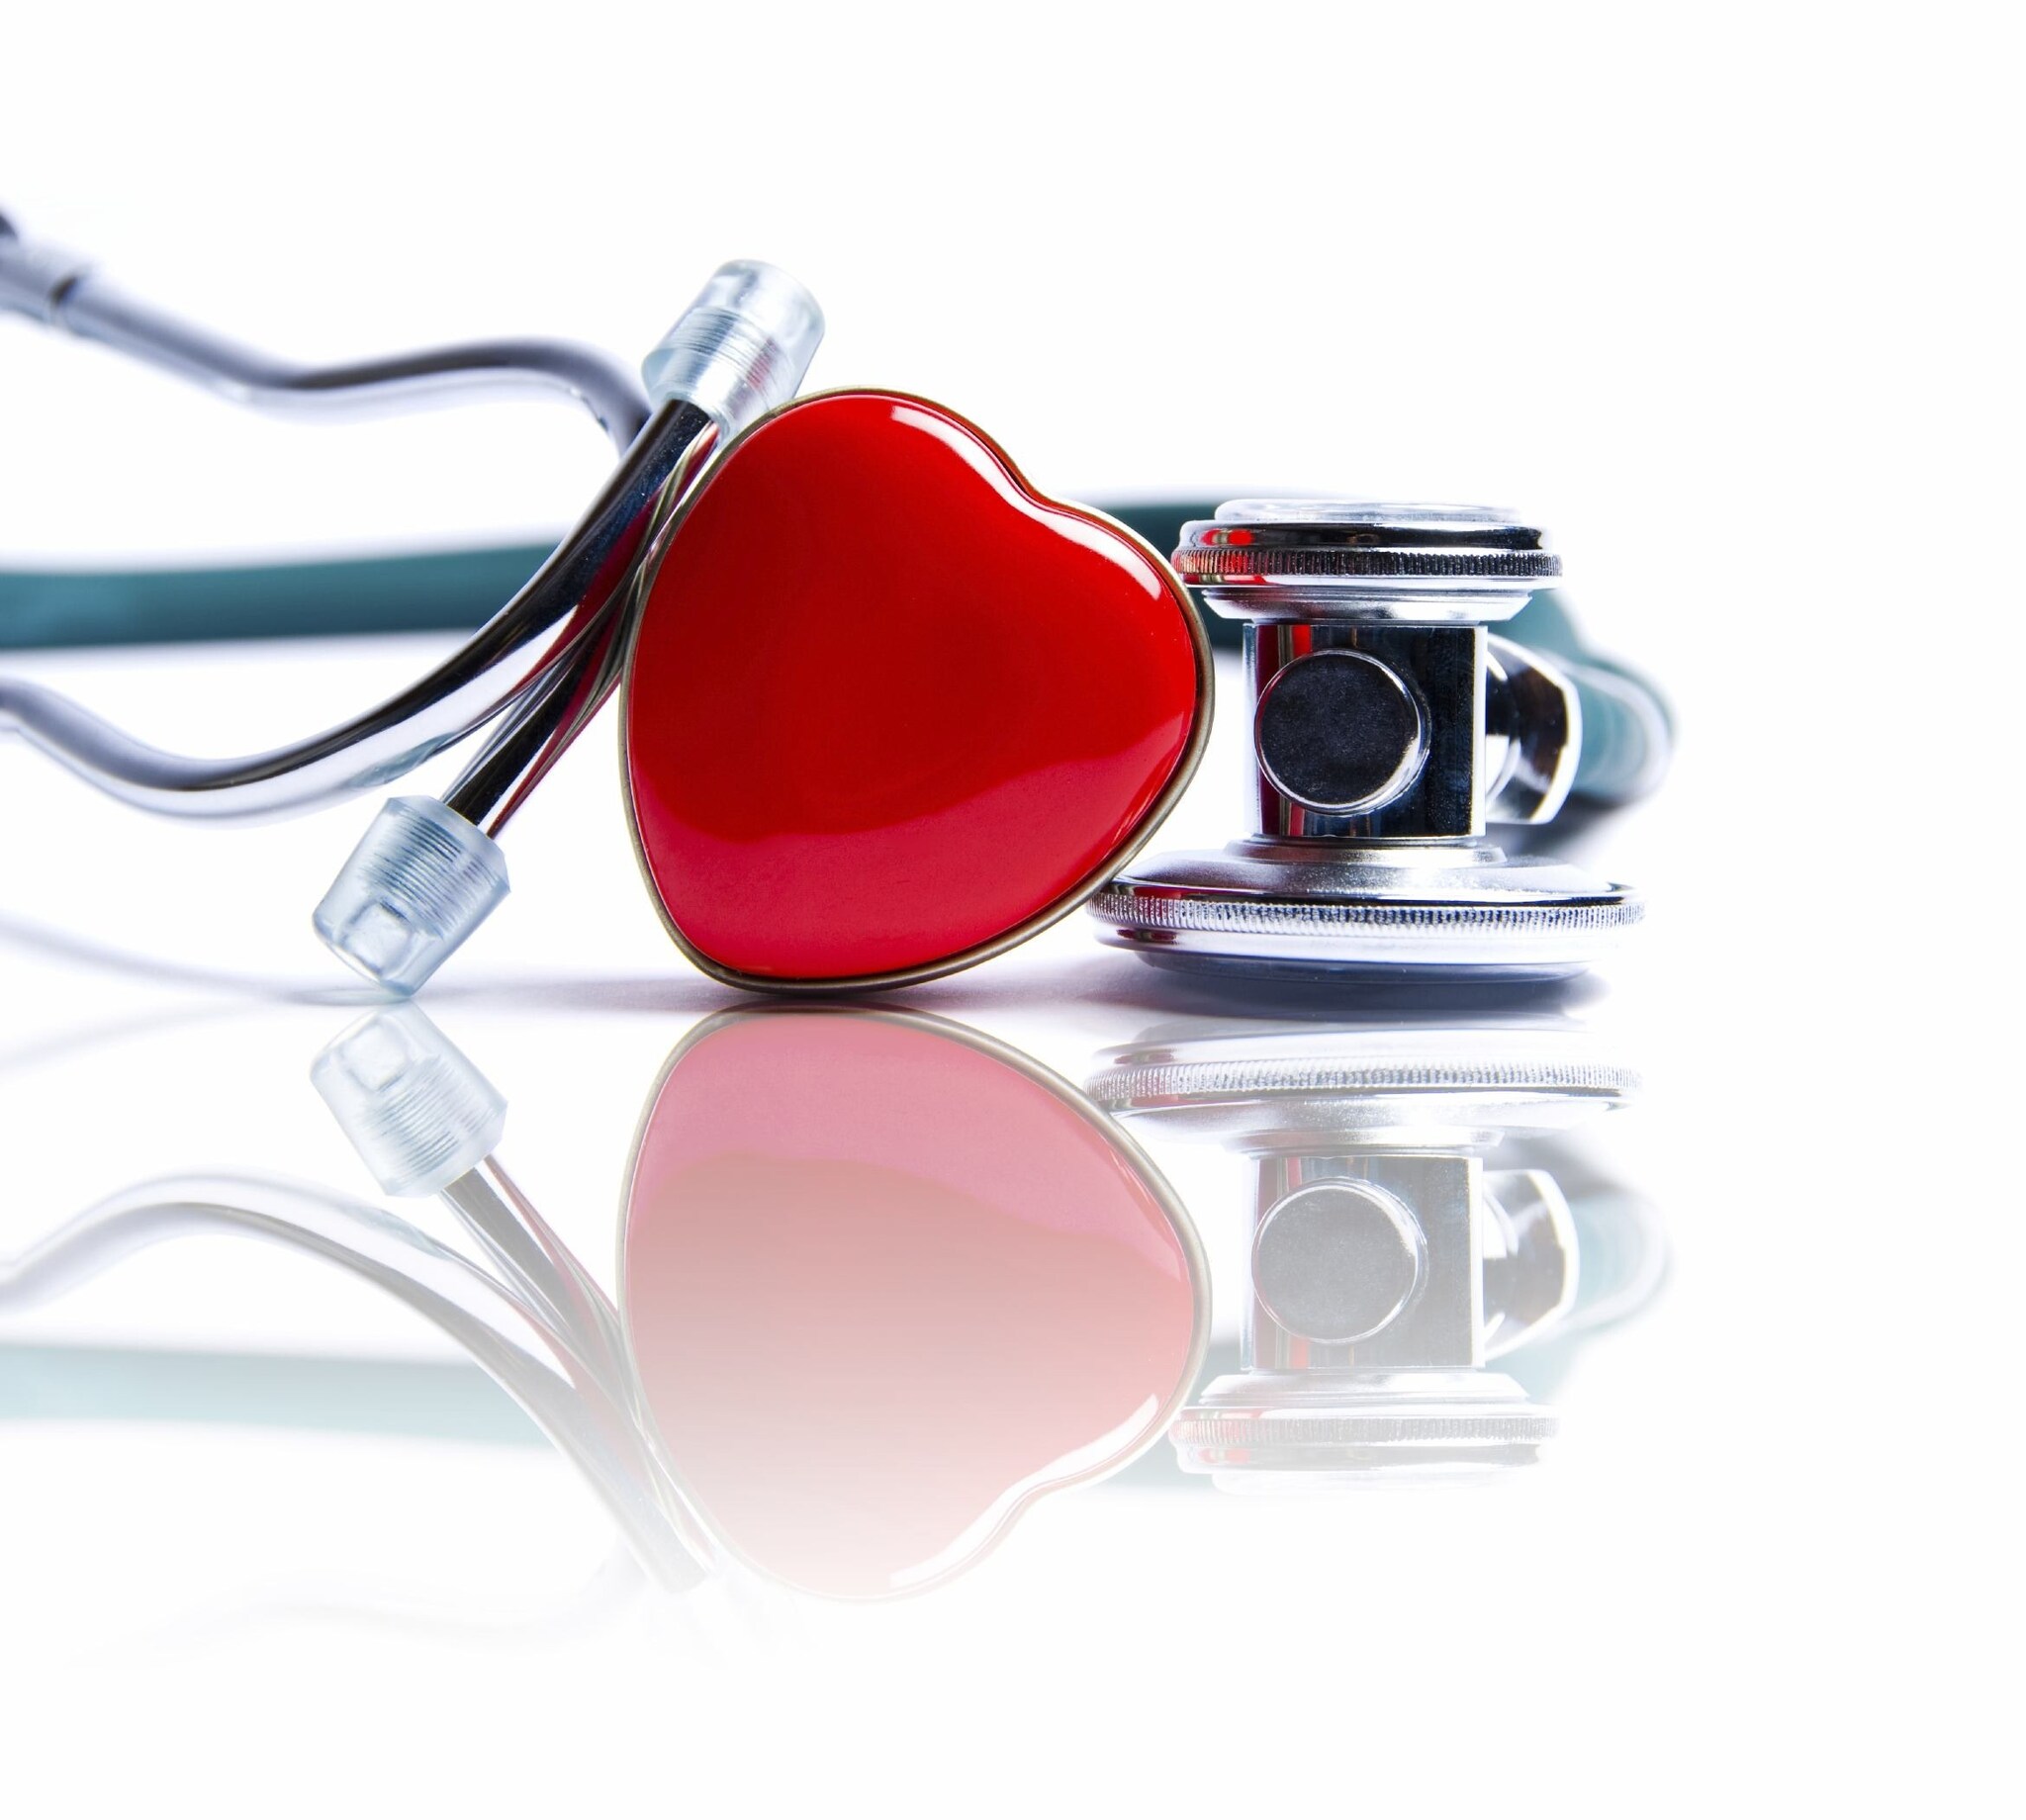 heart pin and stethoscope 